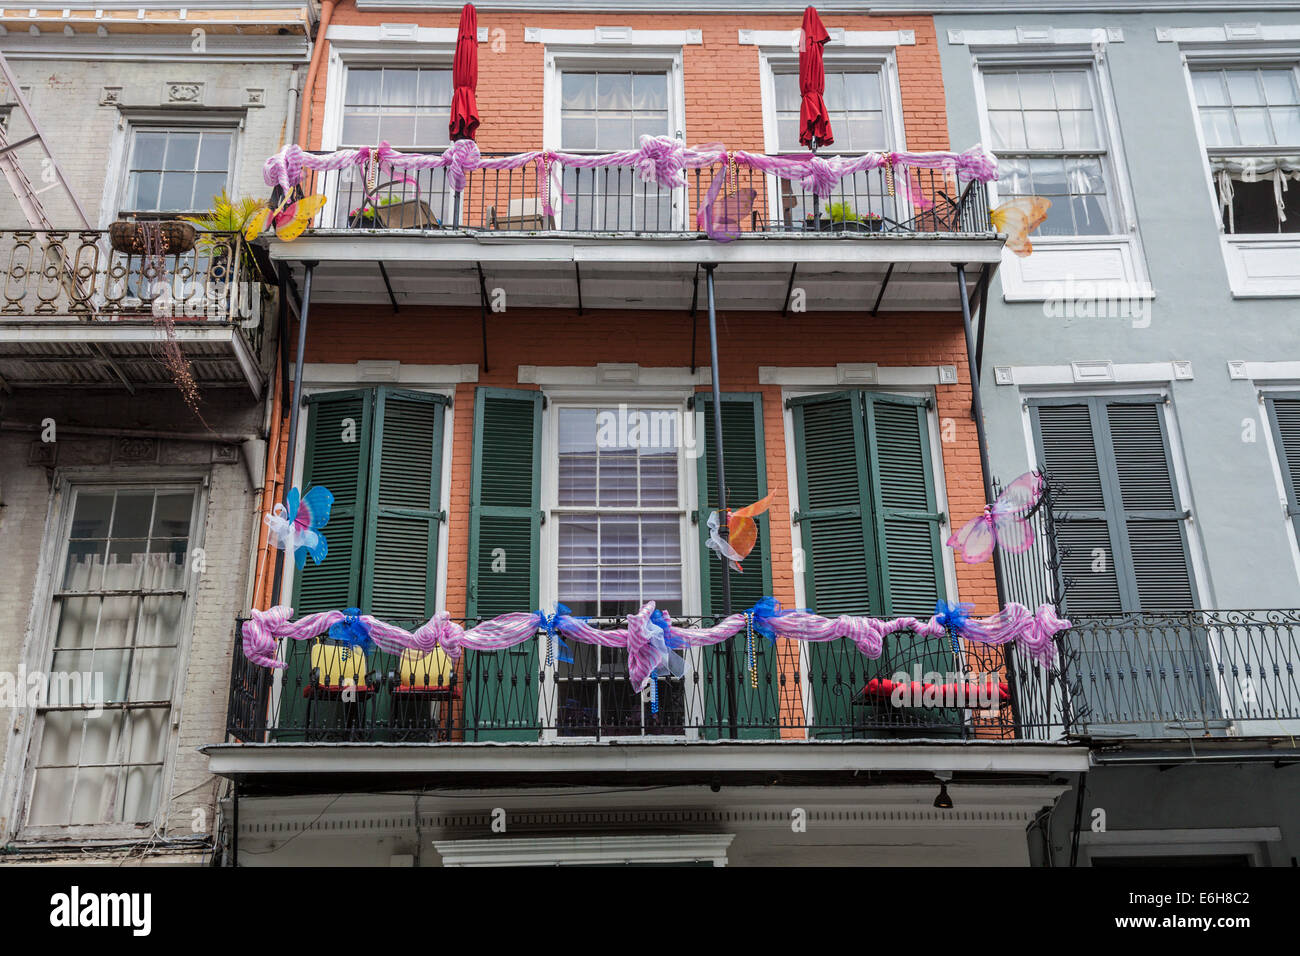 Ribbons, beads and bunting on residential balconies in the French Quarter of New Orleans, Louisiana Stock Photo